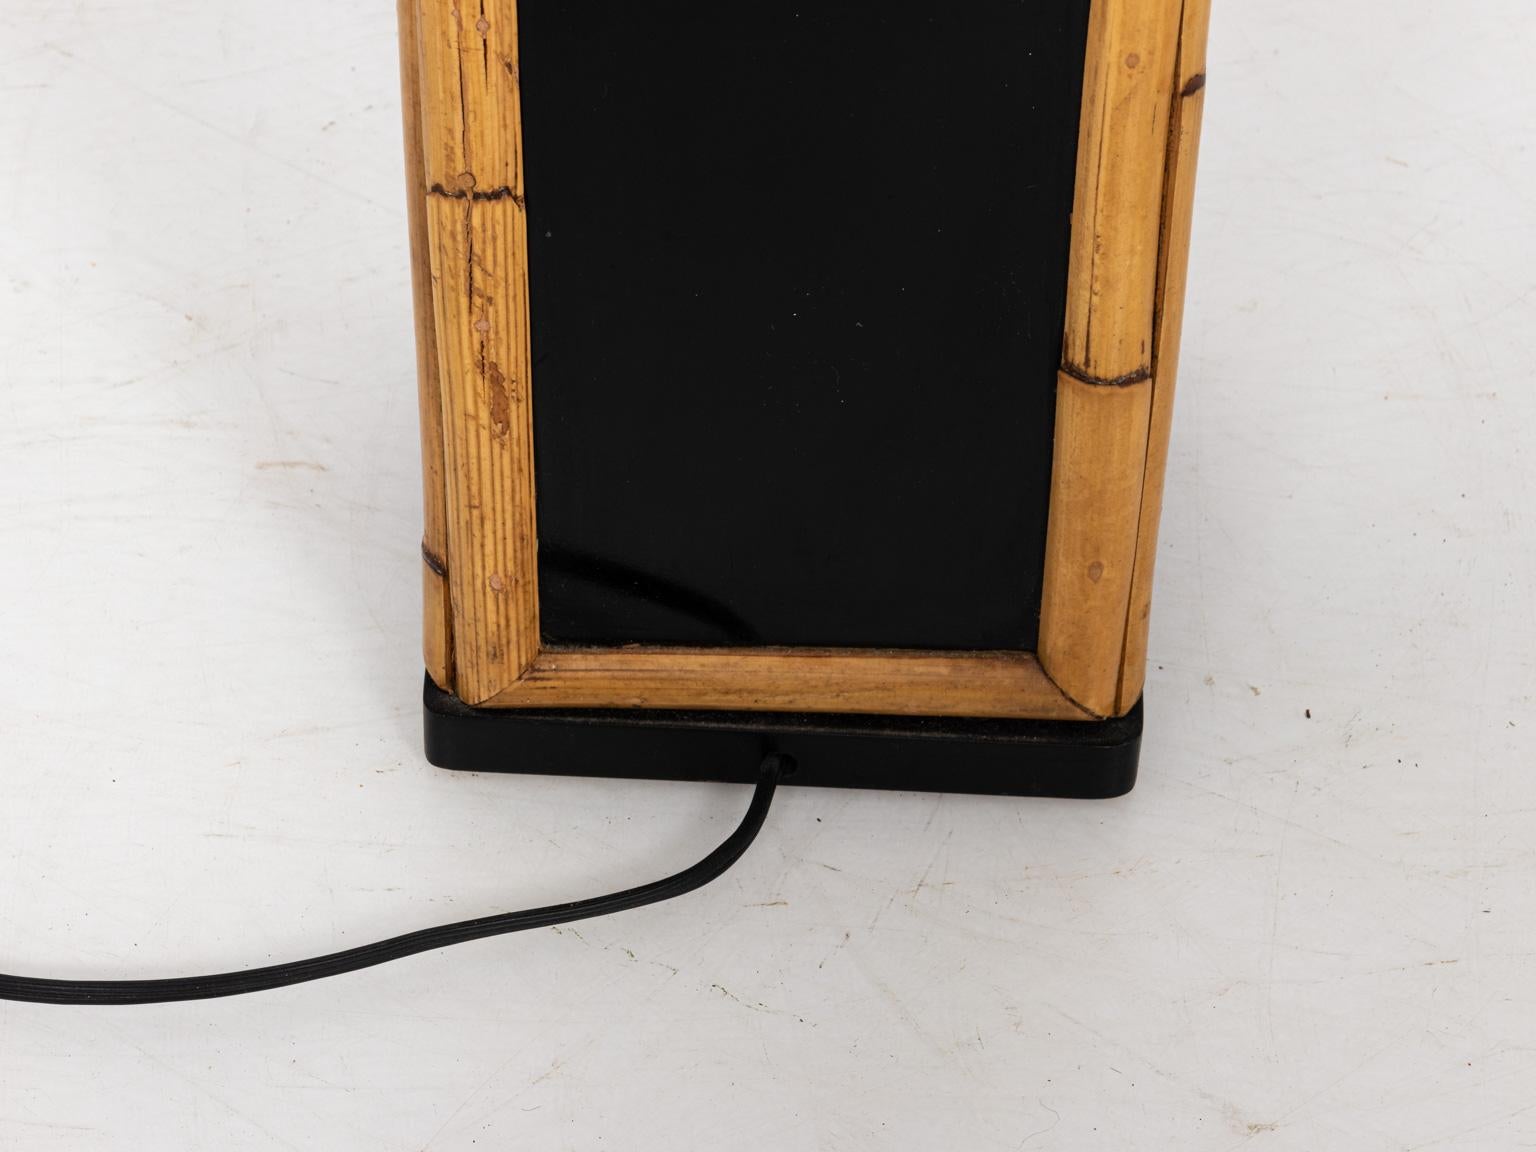 Mid-Century Modern style sleek rectangular table lamp in black lacquer, trimmed with real bamboo, circa 1960s. Shade not included. Please note of wear consistent with age. Made in the United States.